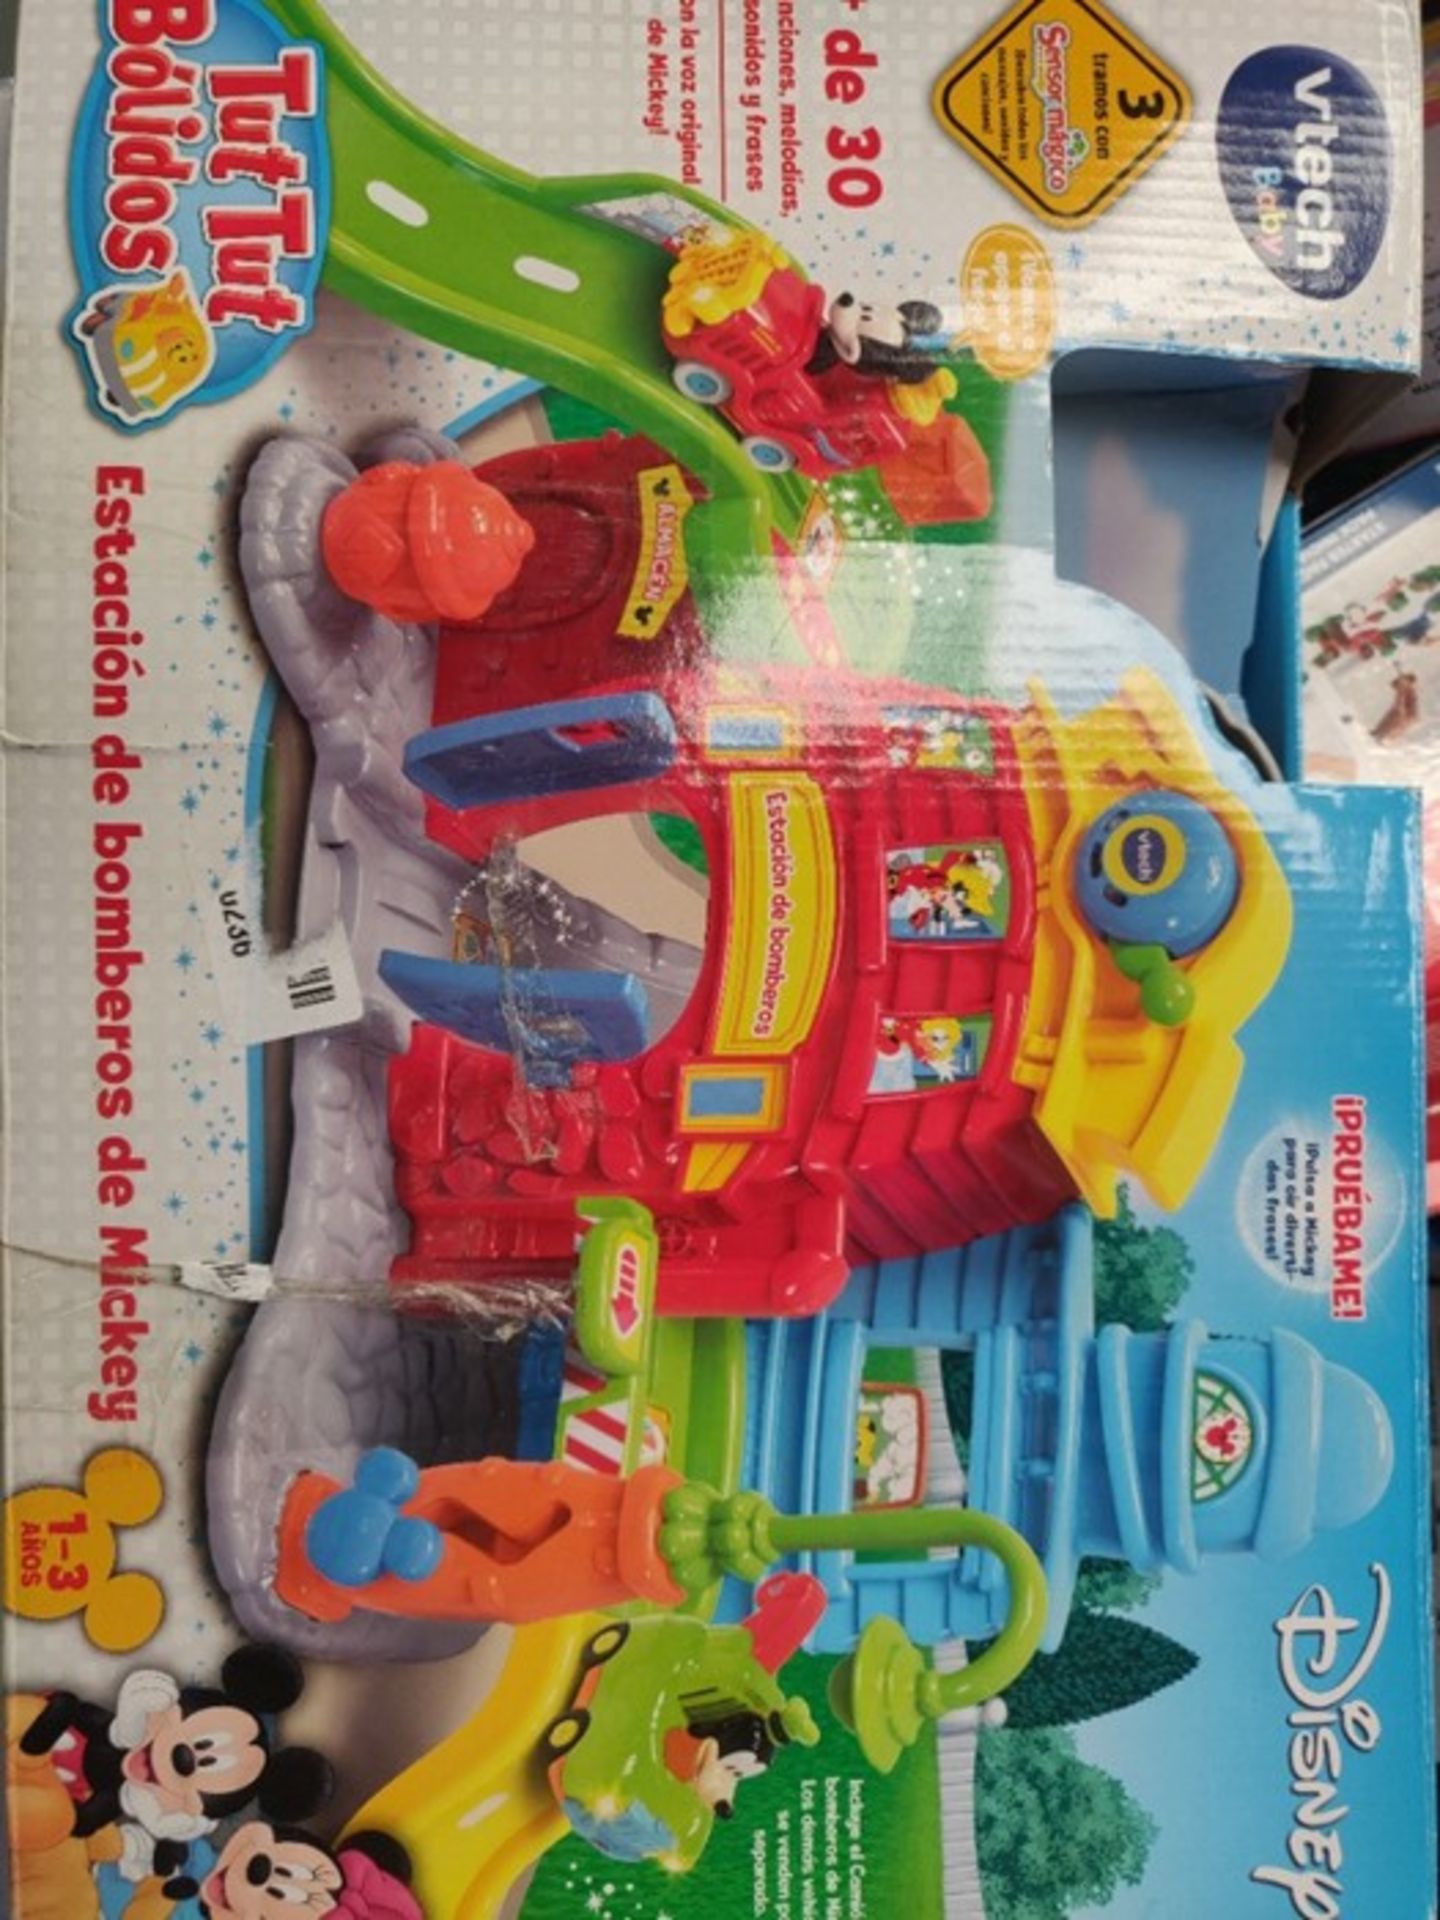 VTech- TutTut Disney Mickey Fire Station Interactive Playset with Music and Real Chara - Image 2 of 2